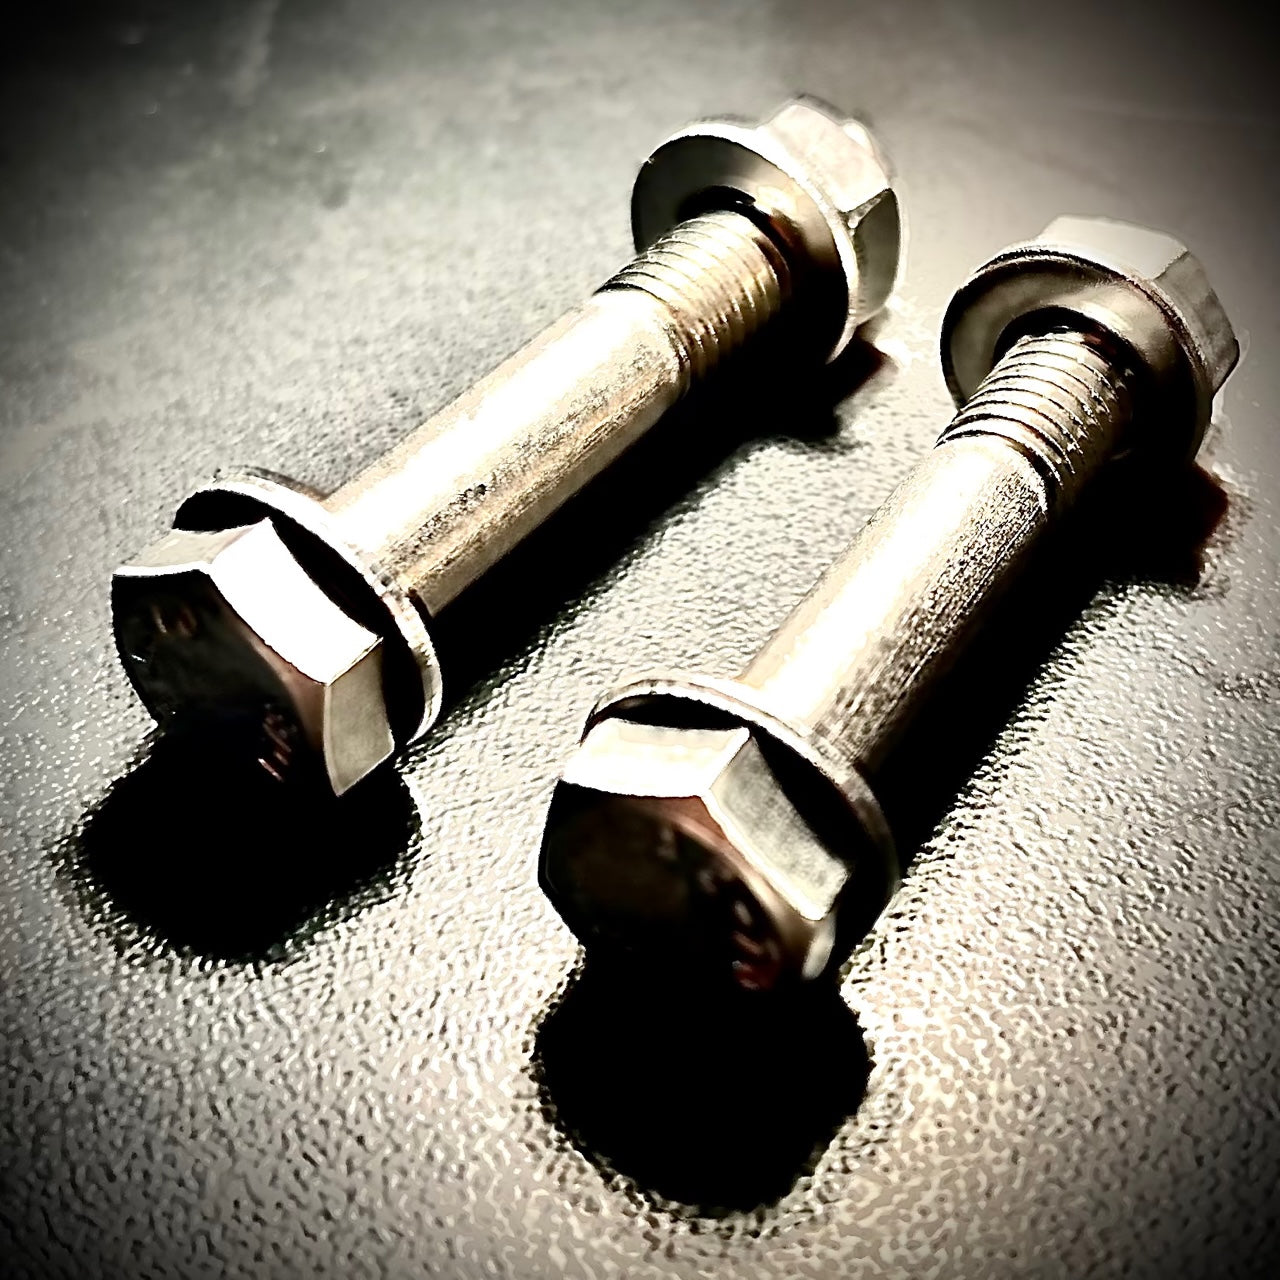 M6 x Under 70mm Hex Bolt plus Nut and Washers A2/ 304 Stainless Steel DIN 931 - Fixaball Ltd. Fixings and Fasteners UK